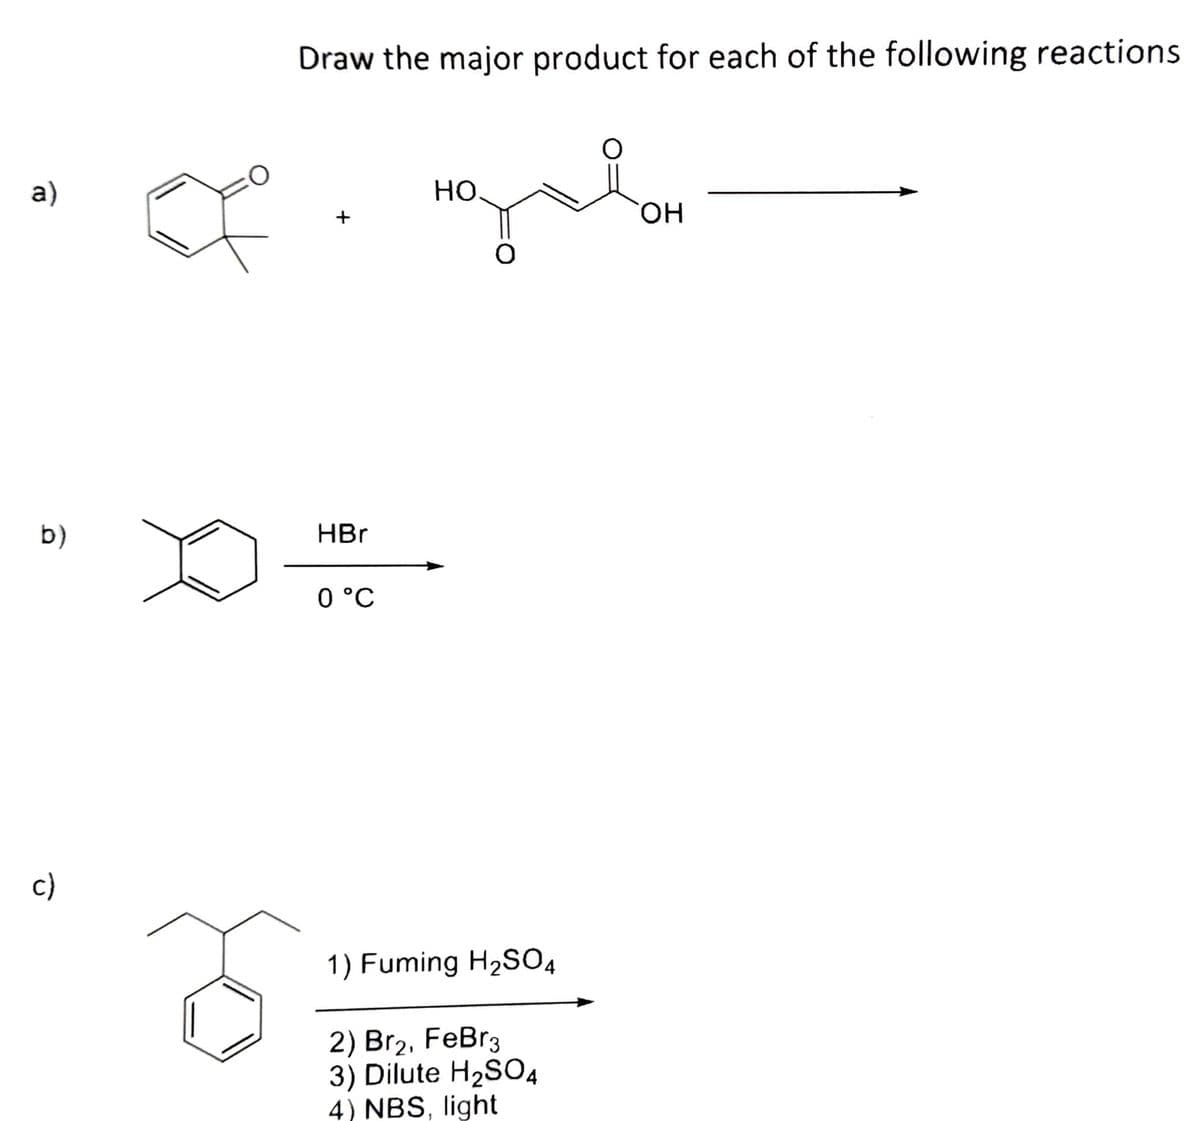 Draw the major product for each of the following reactions
a)
Но.
он
b)
HBr
0 °C
c)
1) Fuming H2S04
2) Br2, FeBr3
3) Dilute H2SO4
4) NBS, light
